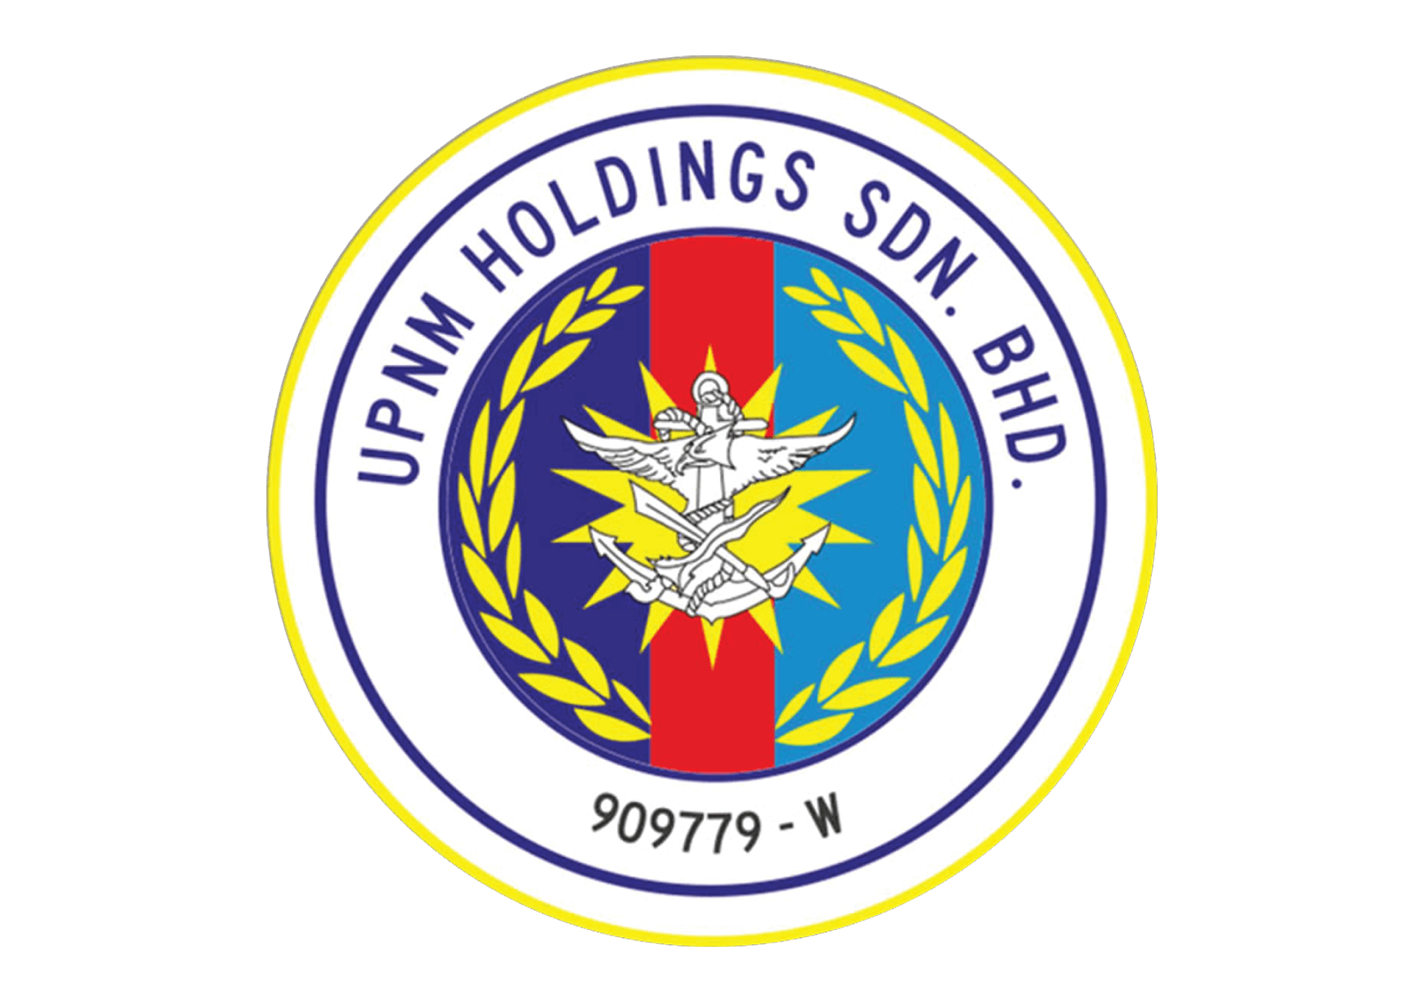 upnm-holdings-1.png